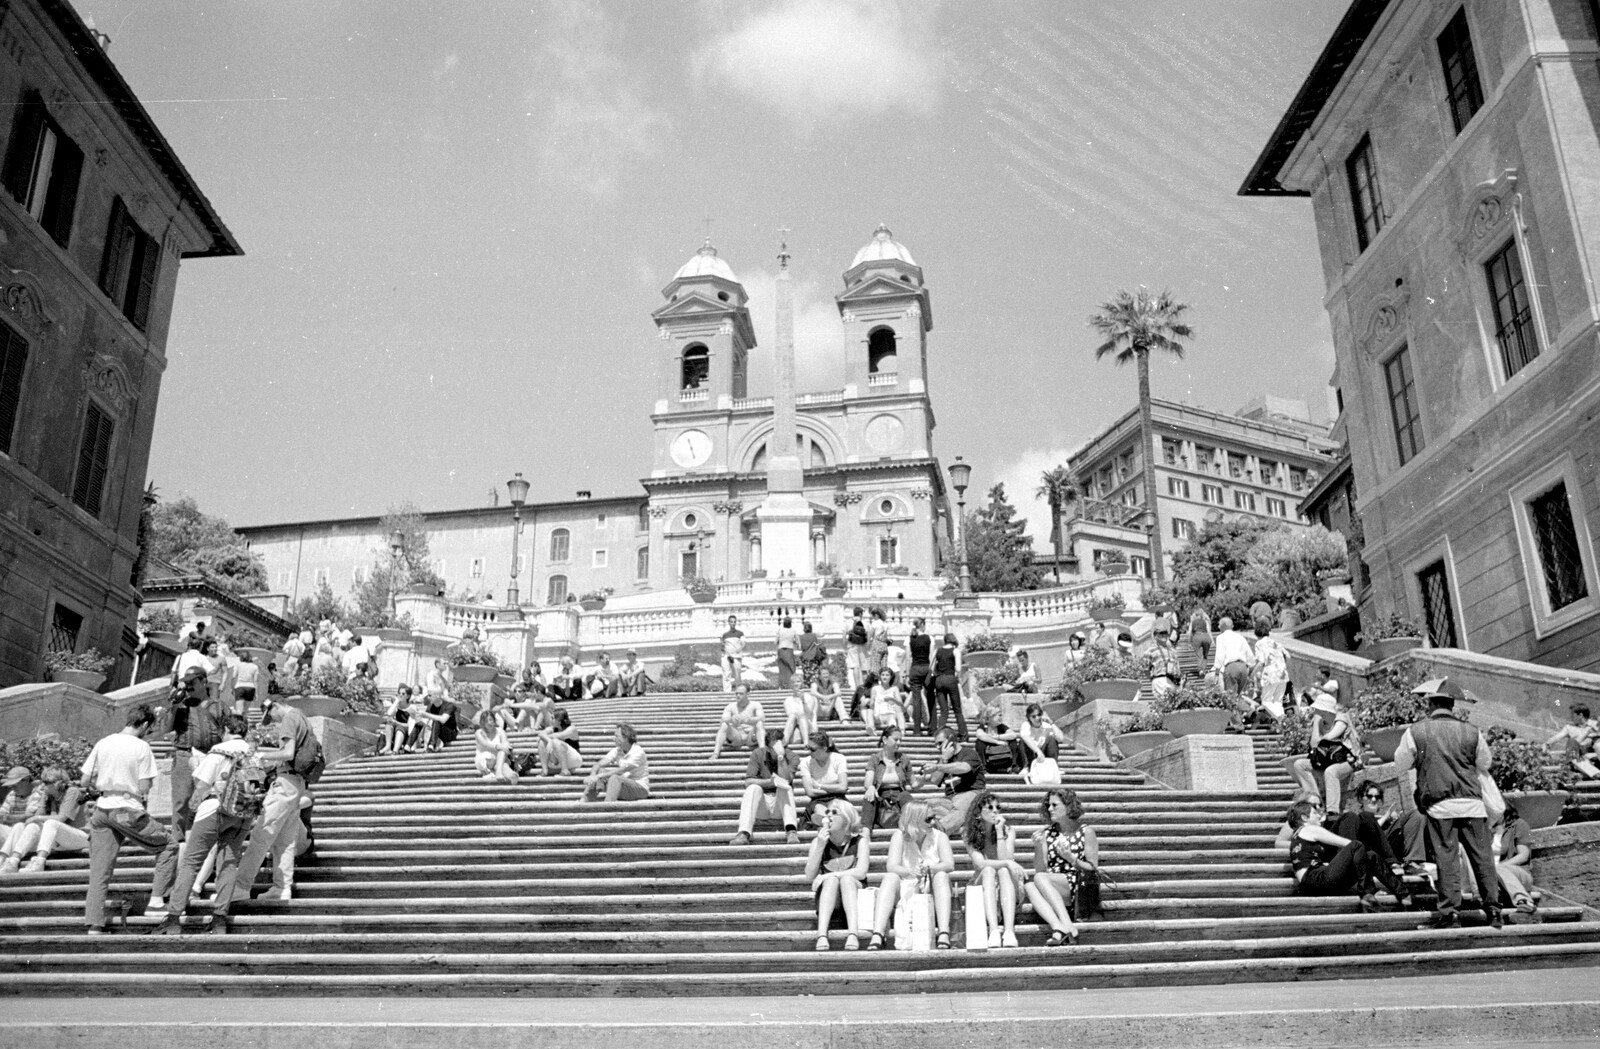 Another view of the Spanish Steps from A Working Trip to Rome, Italy - 10th September 1999